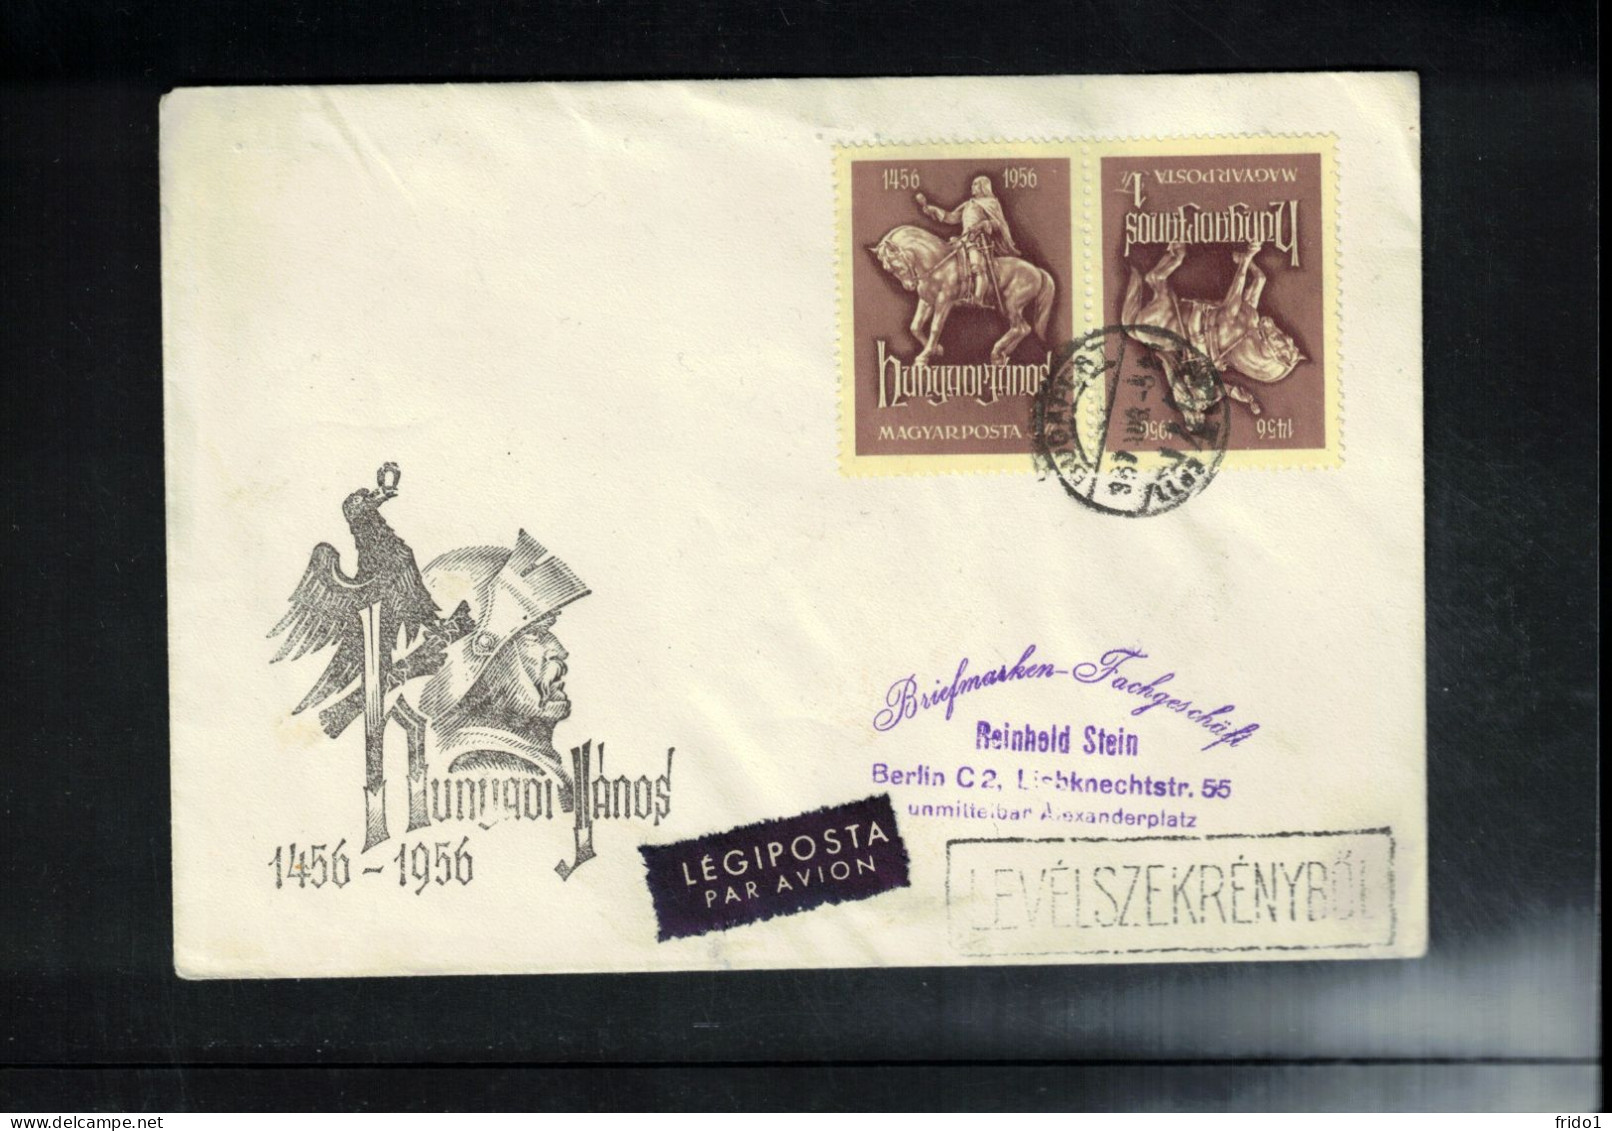 Hungary 1956 Interesting Letter To Germany - Covers & Documents